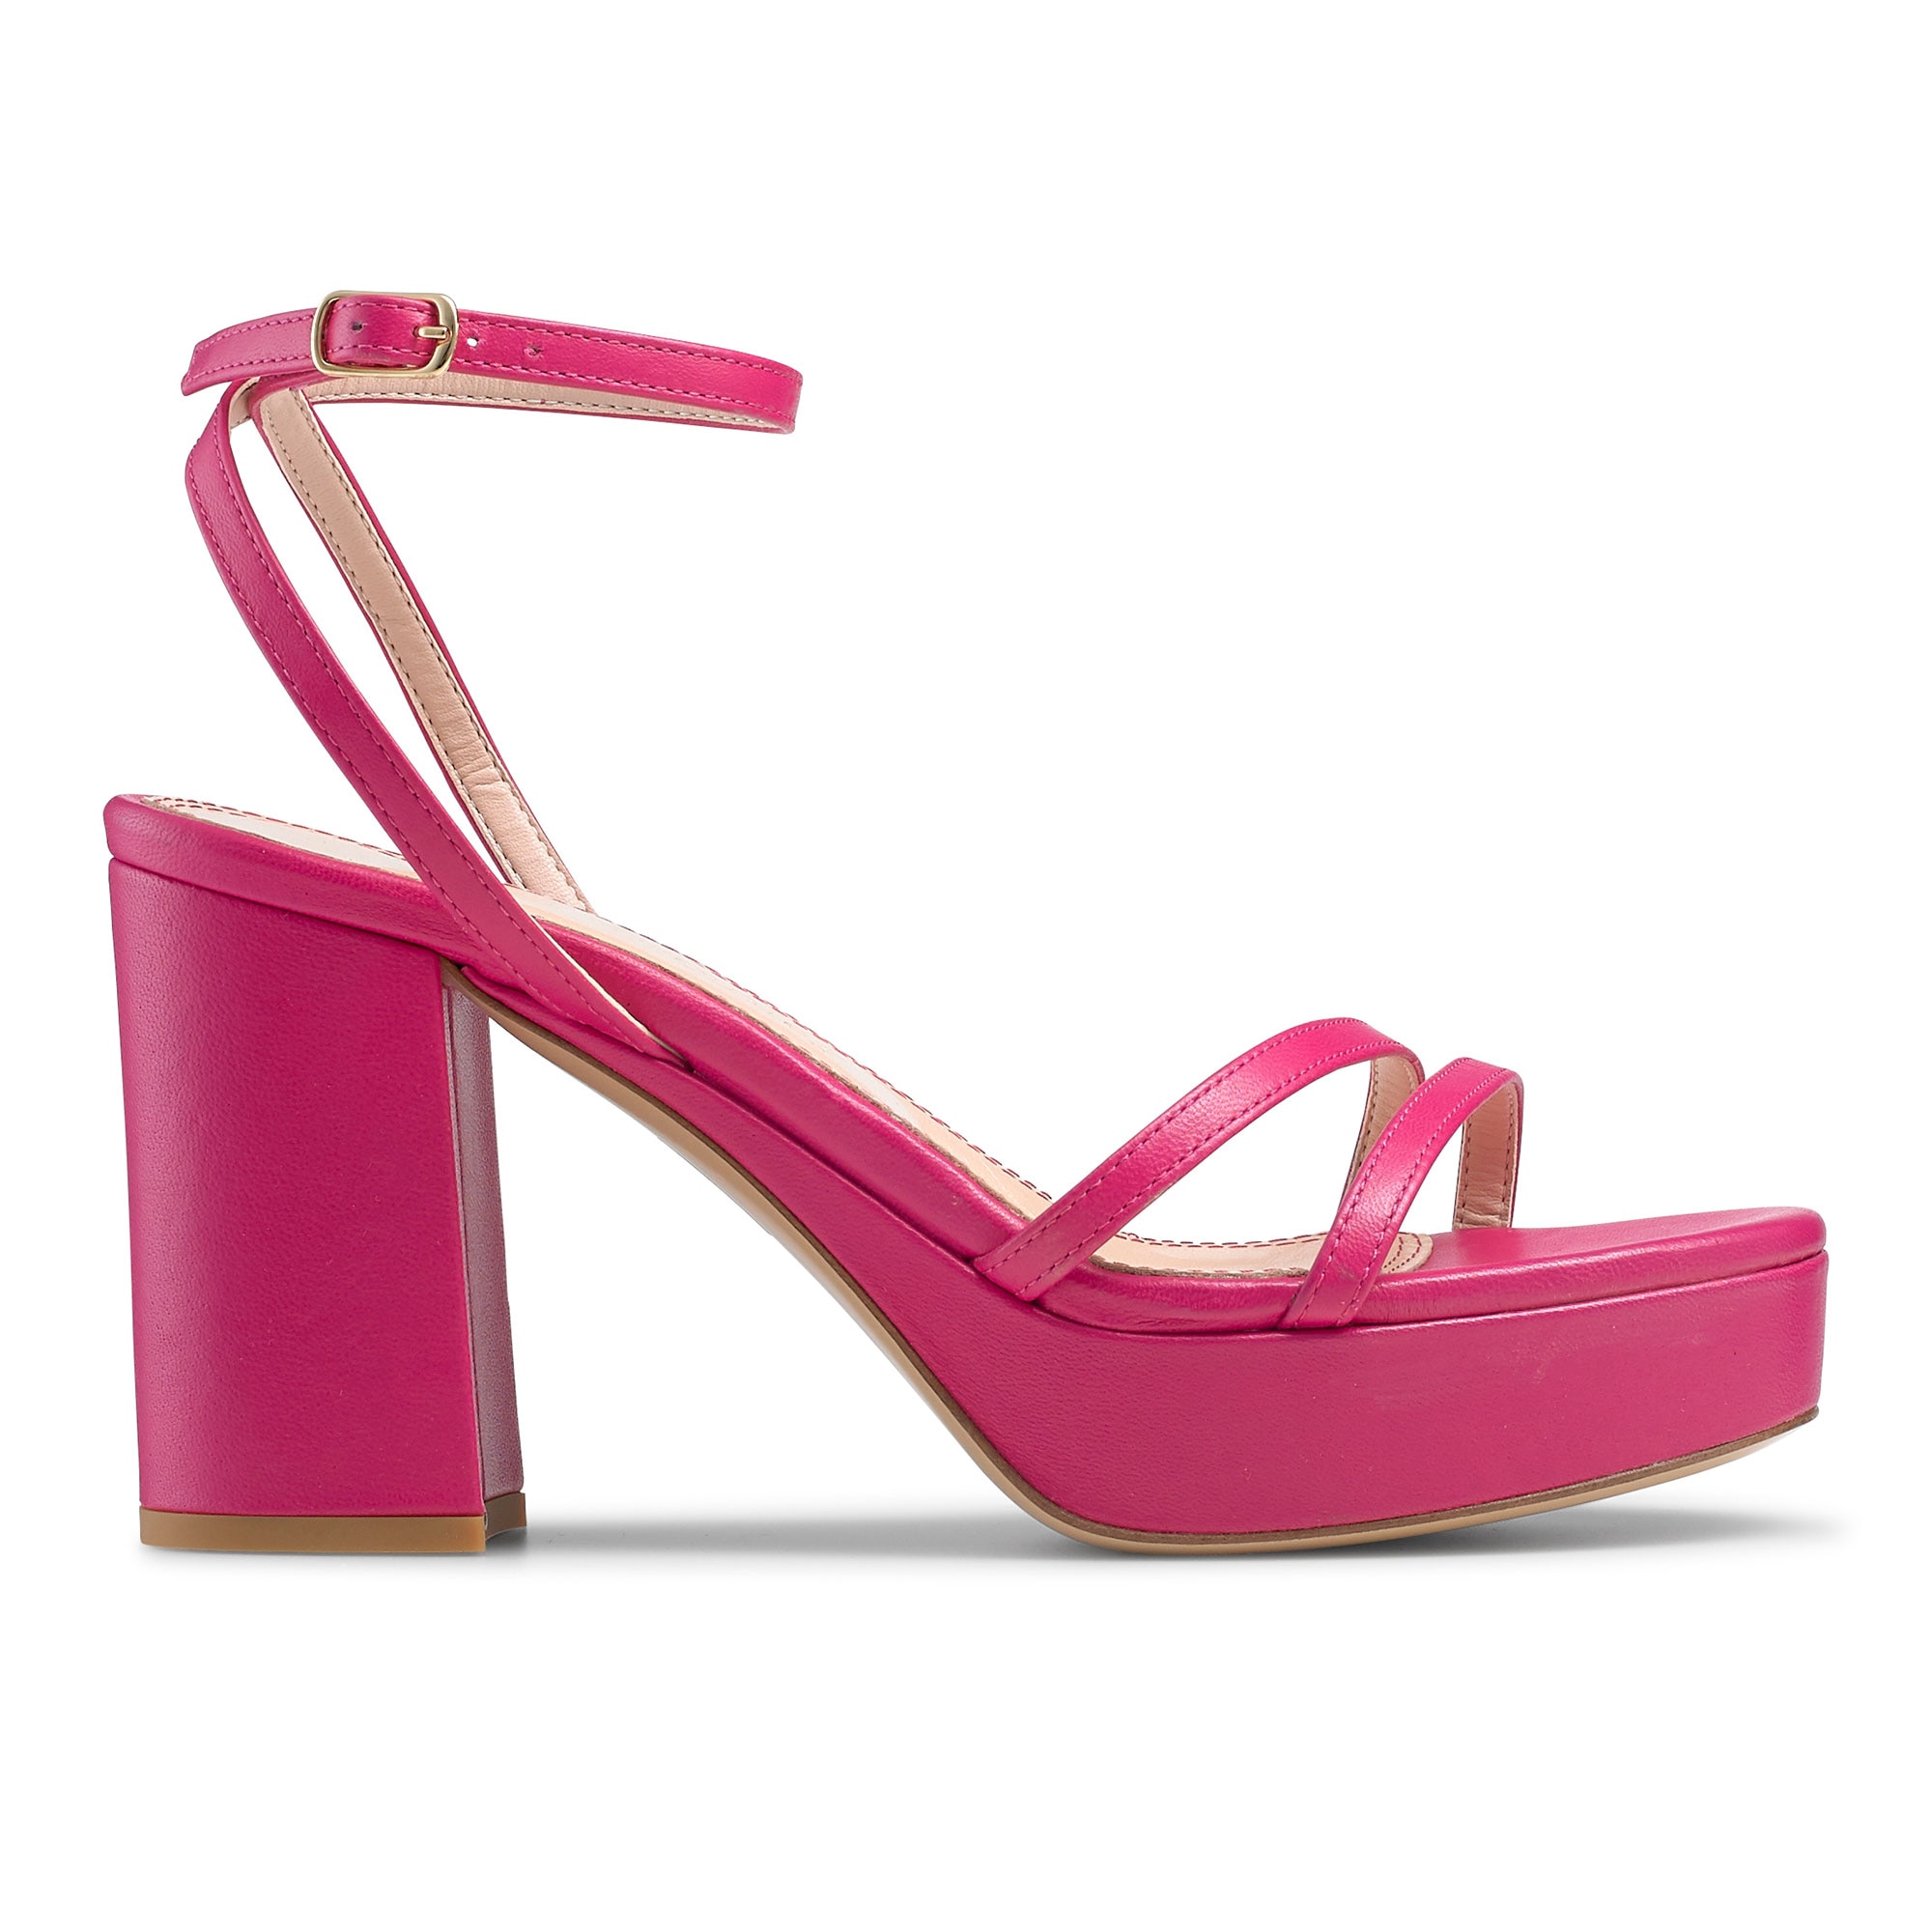 Russell and Bromley Topline platform sandal in pink